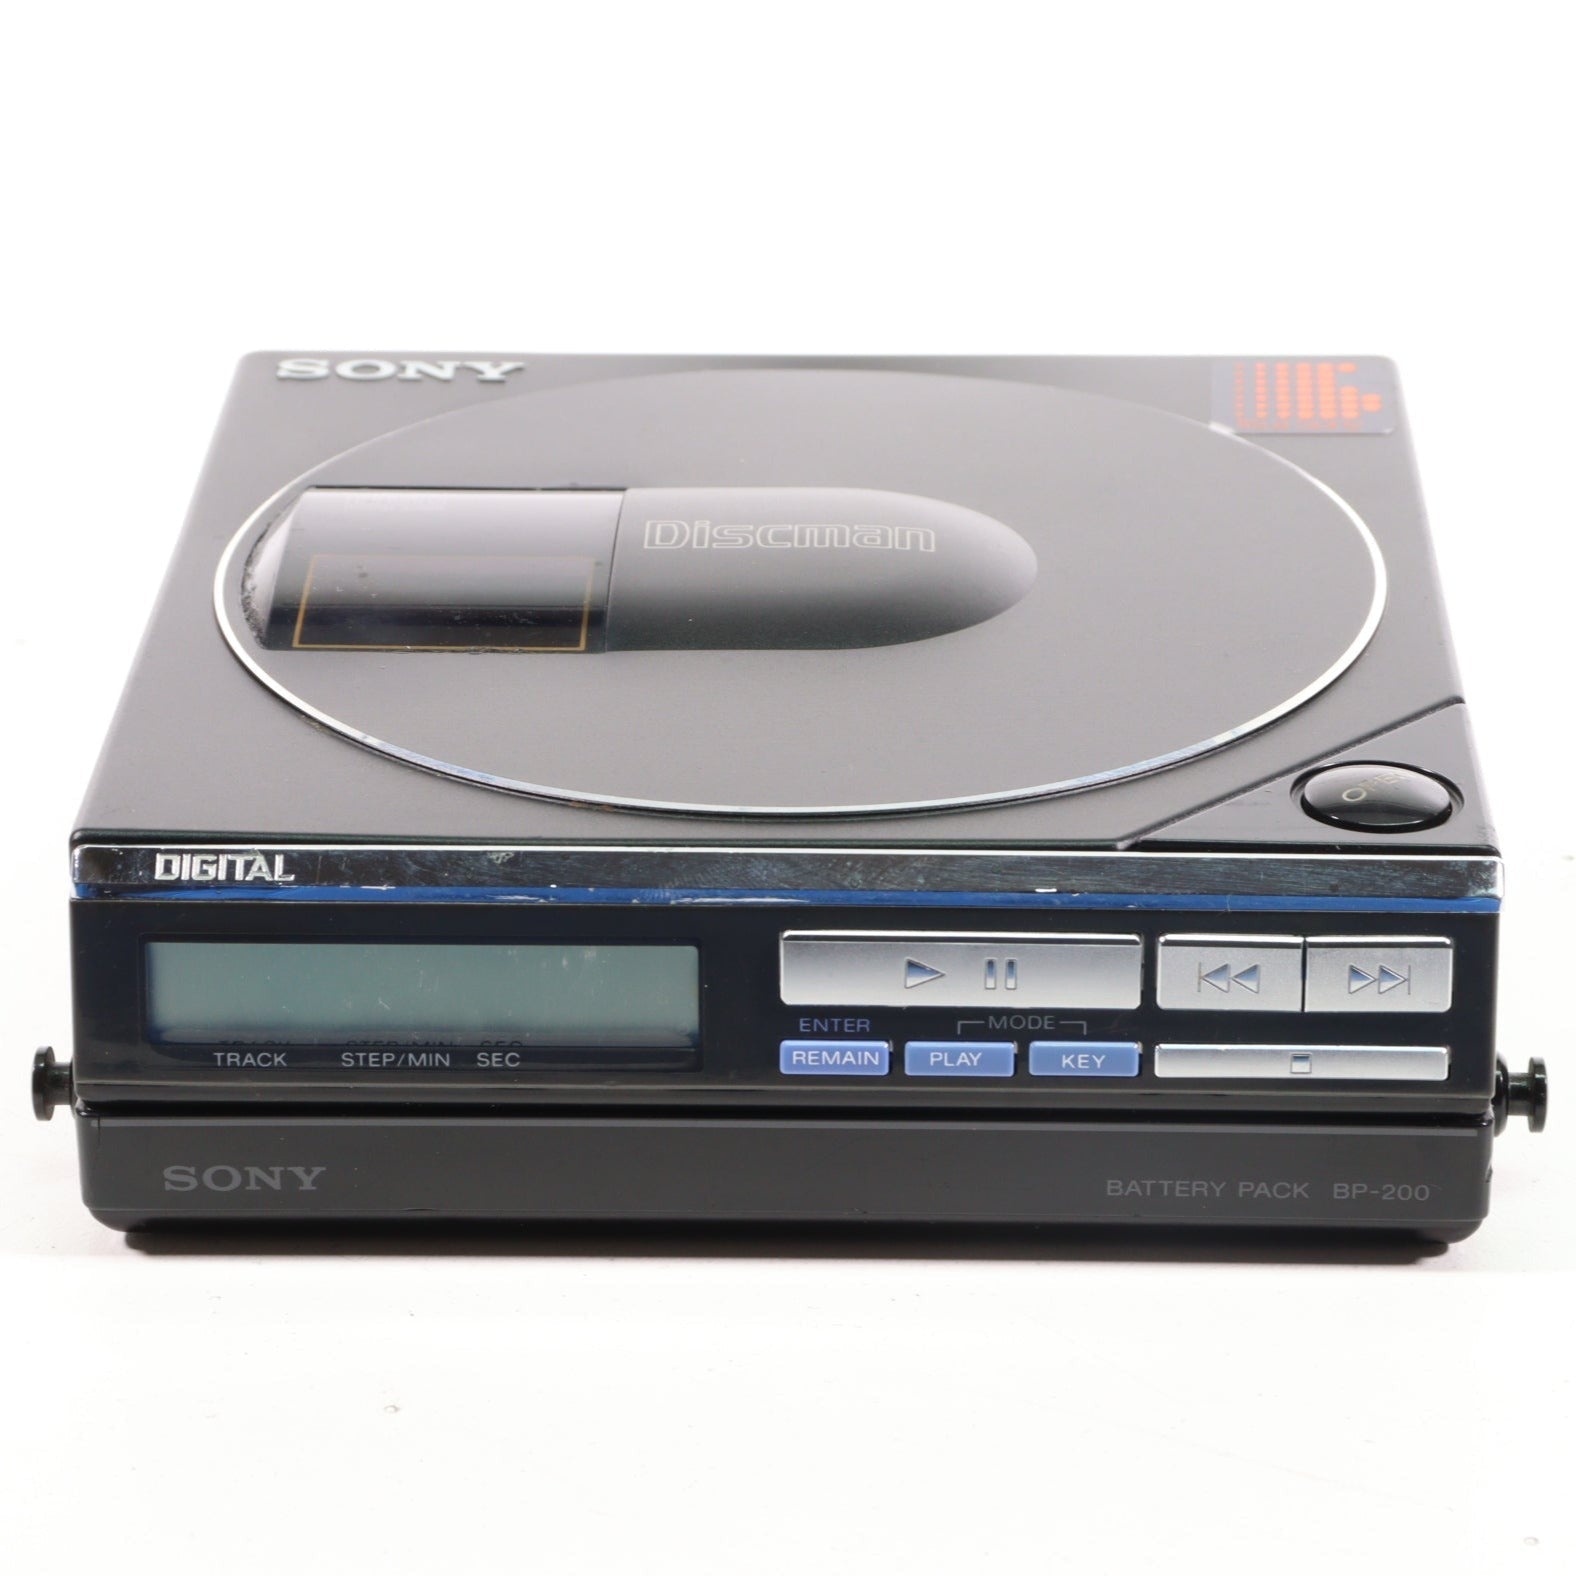 Sony Discman D7 Personal CD Player with BP-200 Battery Pack and Case (WON'T  POWER ON)